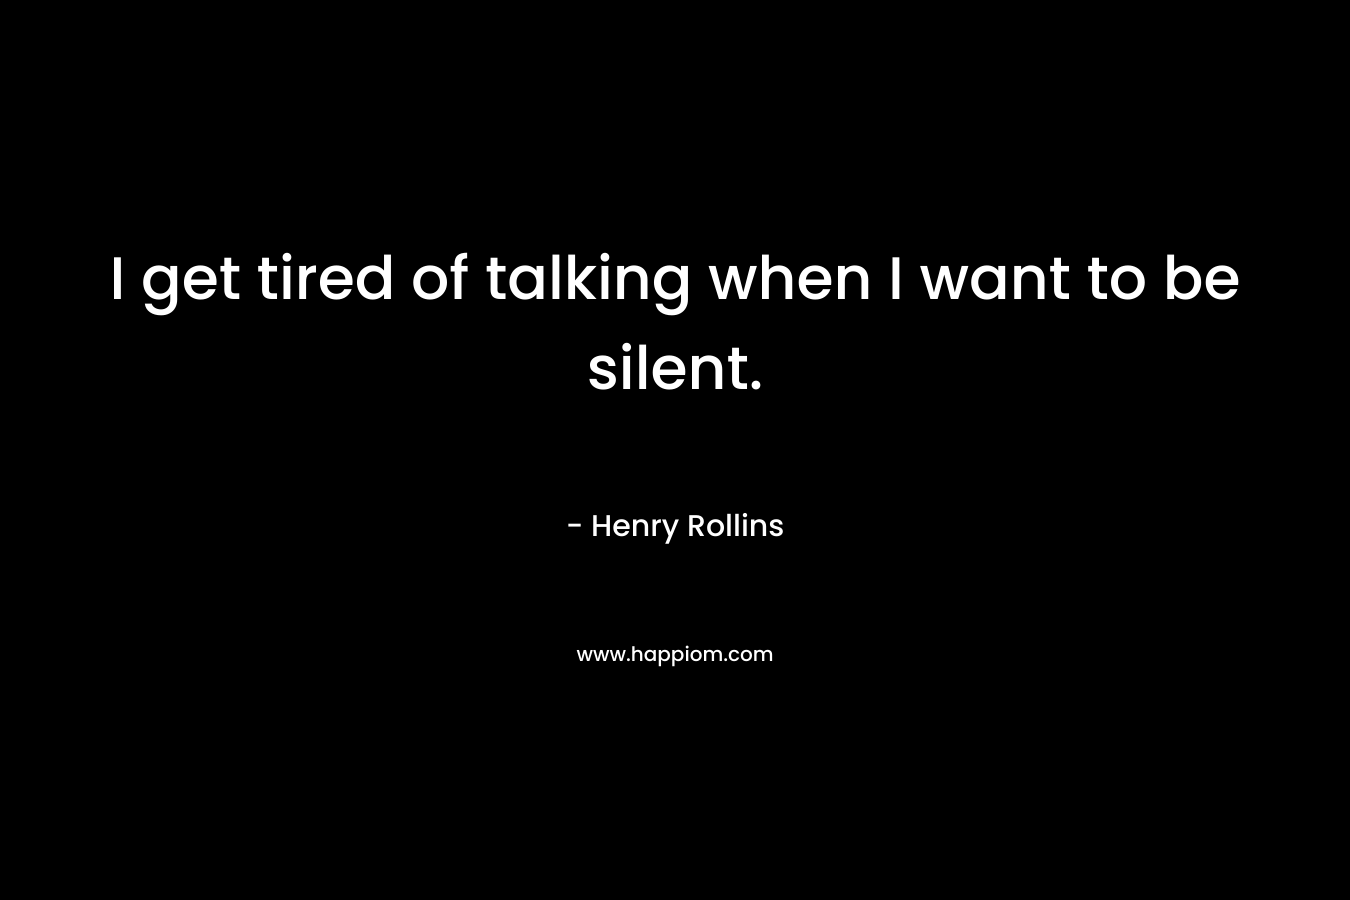 I get tired of talking when I want to be silent. – Henry Rollins